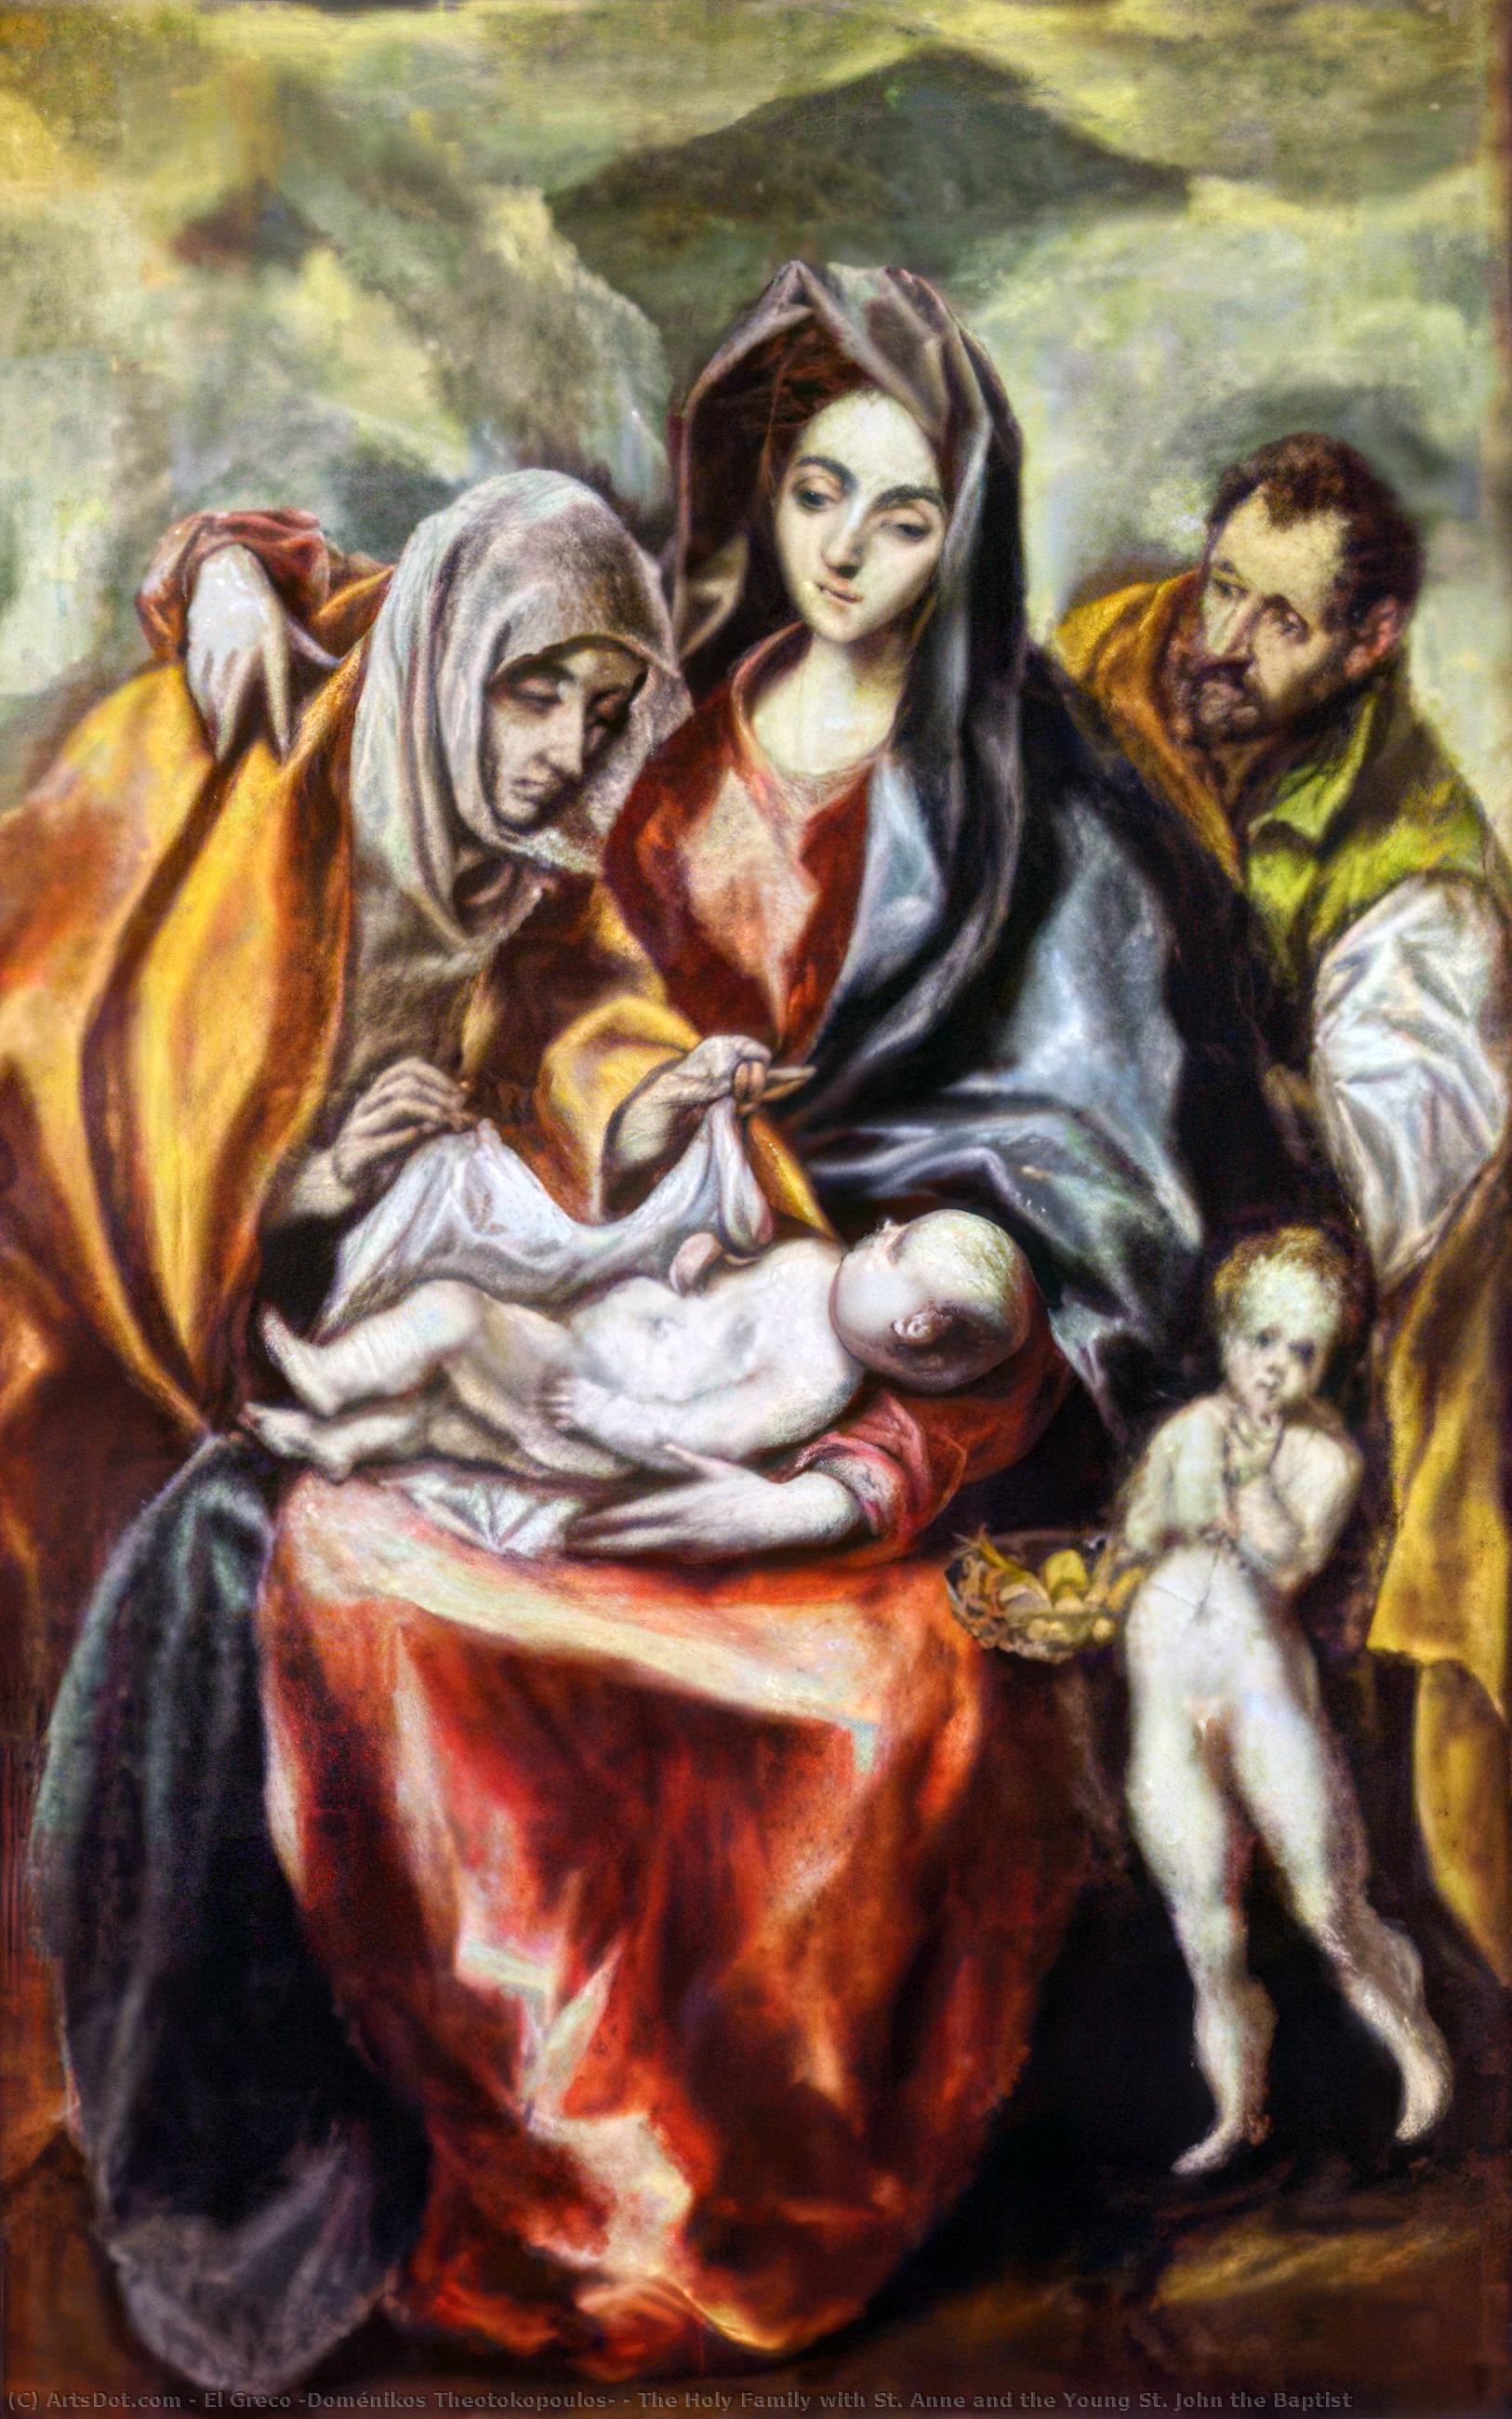 WikiOO.org - Encyclopedia of Fine Arts - Målning, konstverk El Greco (Doménikos Theotokopoulos) - The Holy Family with St. Anne and the Young St. John the Baptist